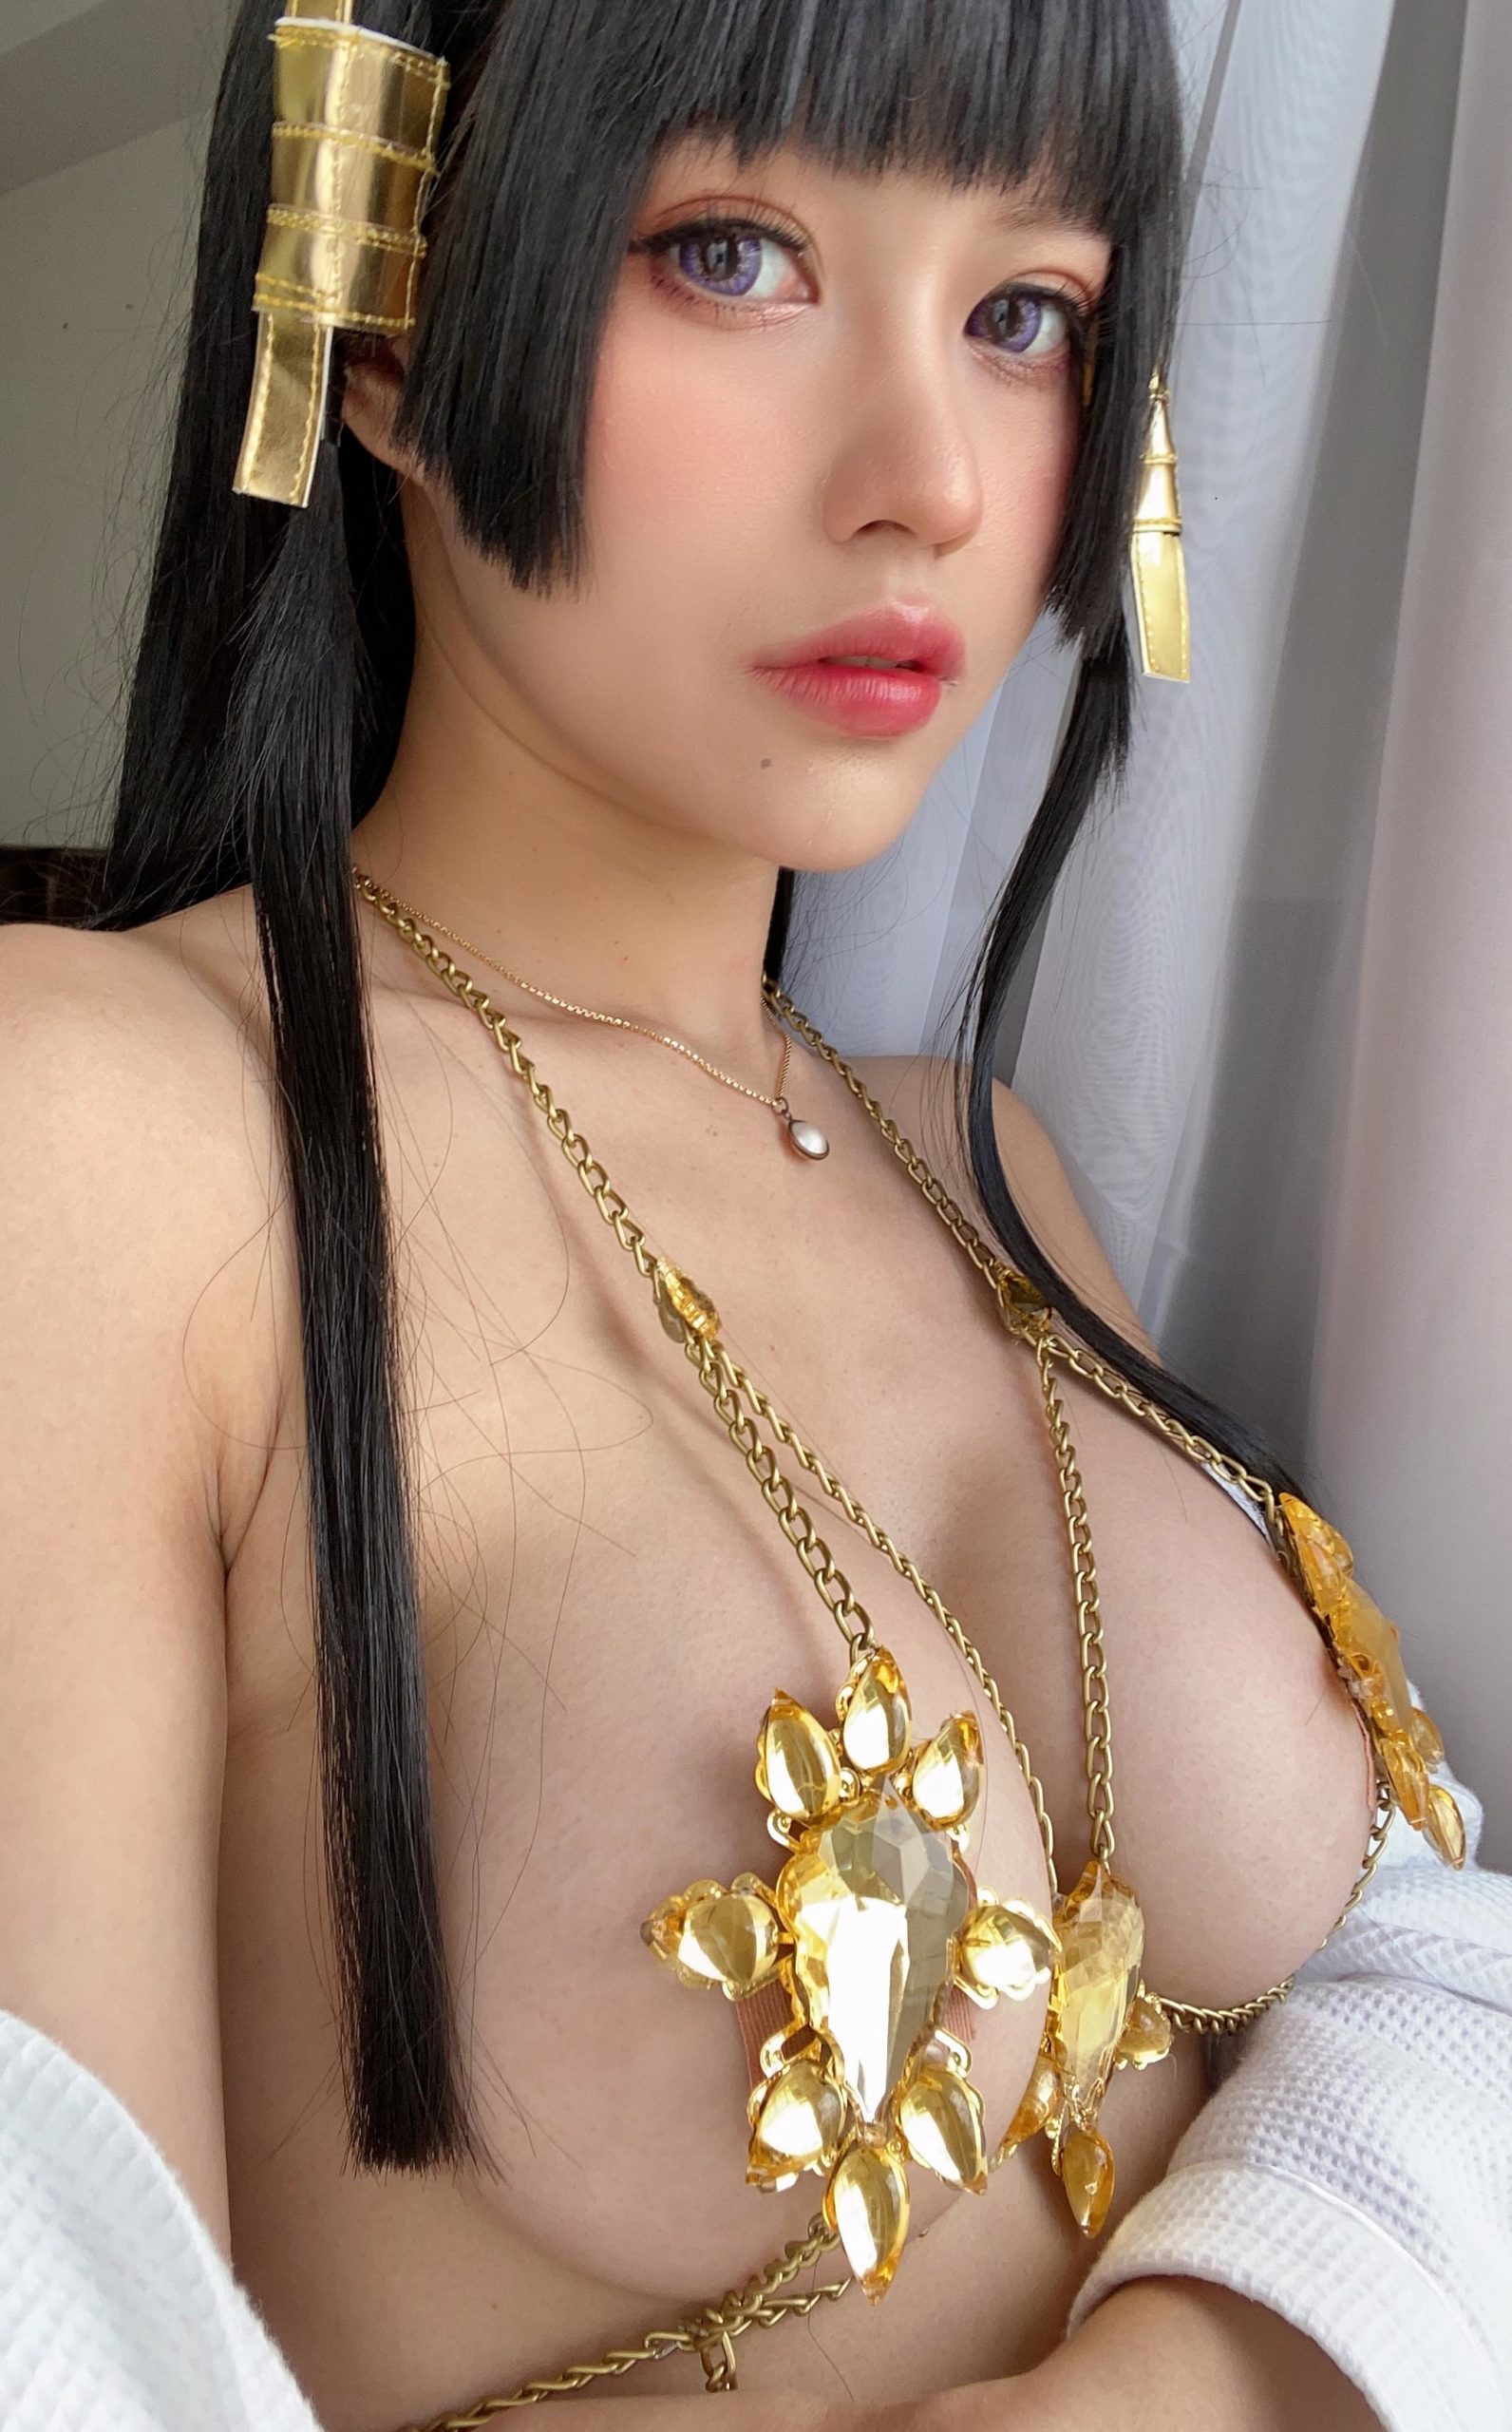 DeadorAlive Nyotengu Cosplay by PingPing 2022 40 scaled 1